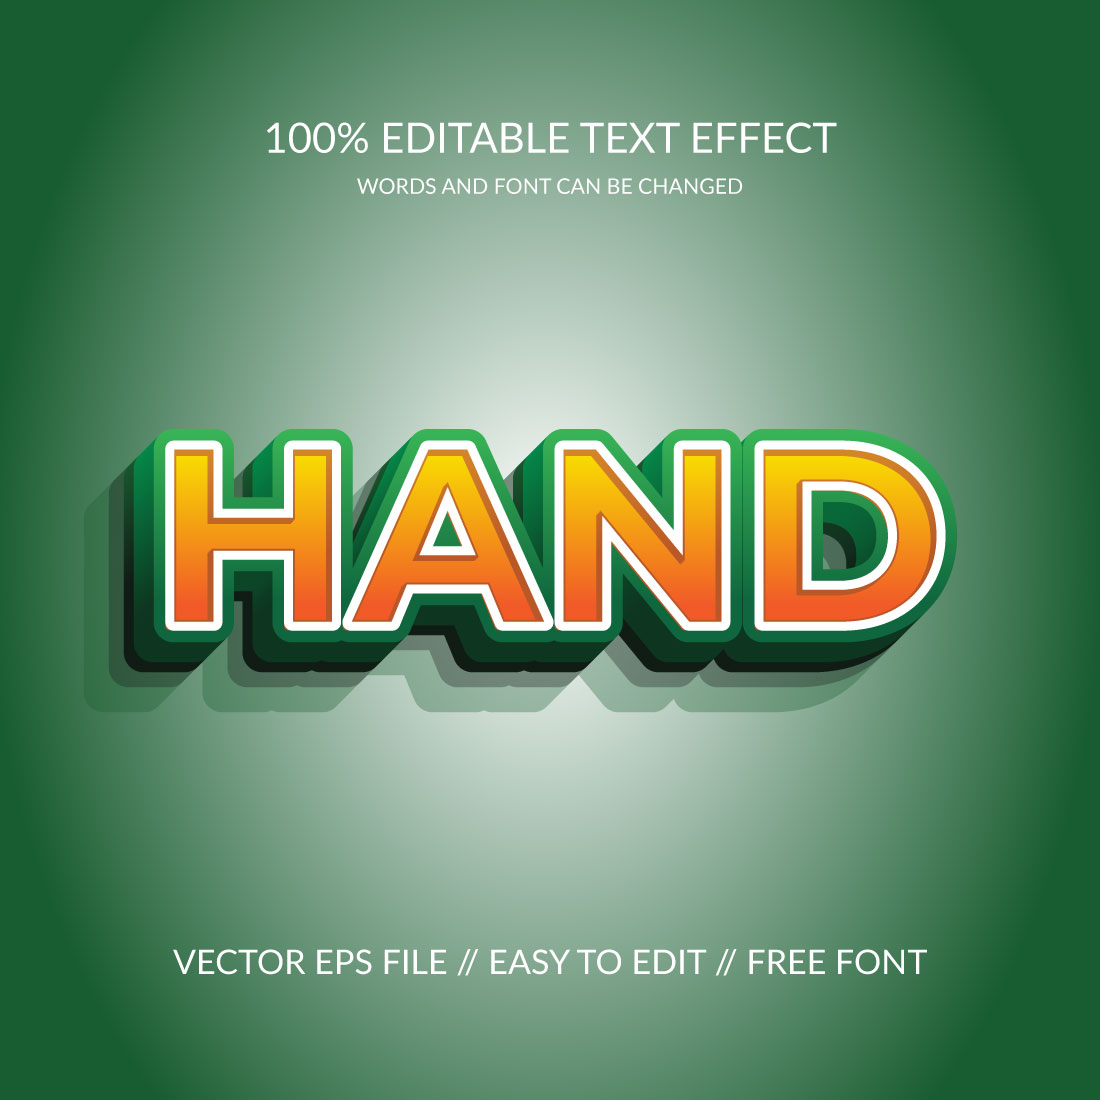 Hand text effect cover image.